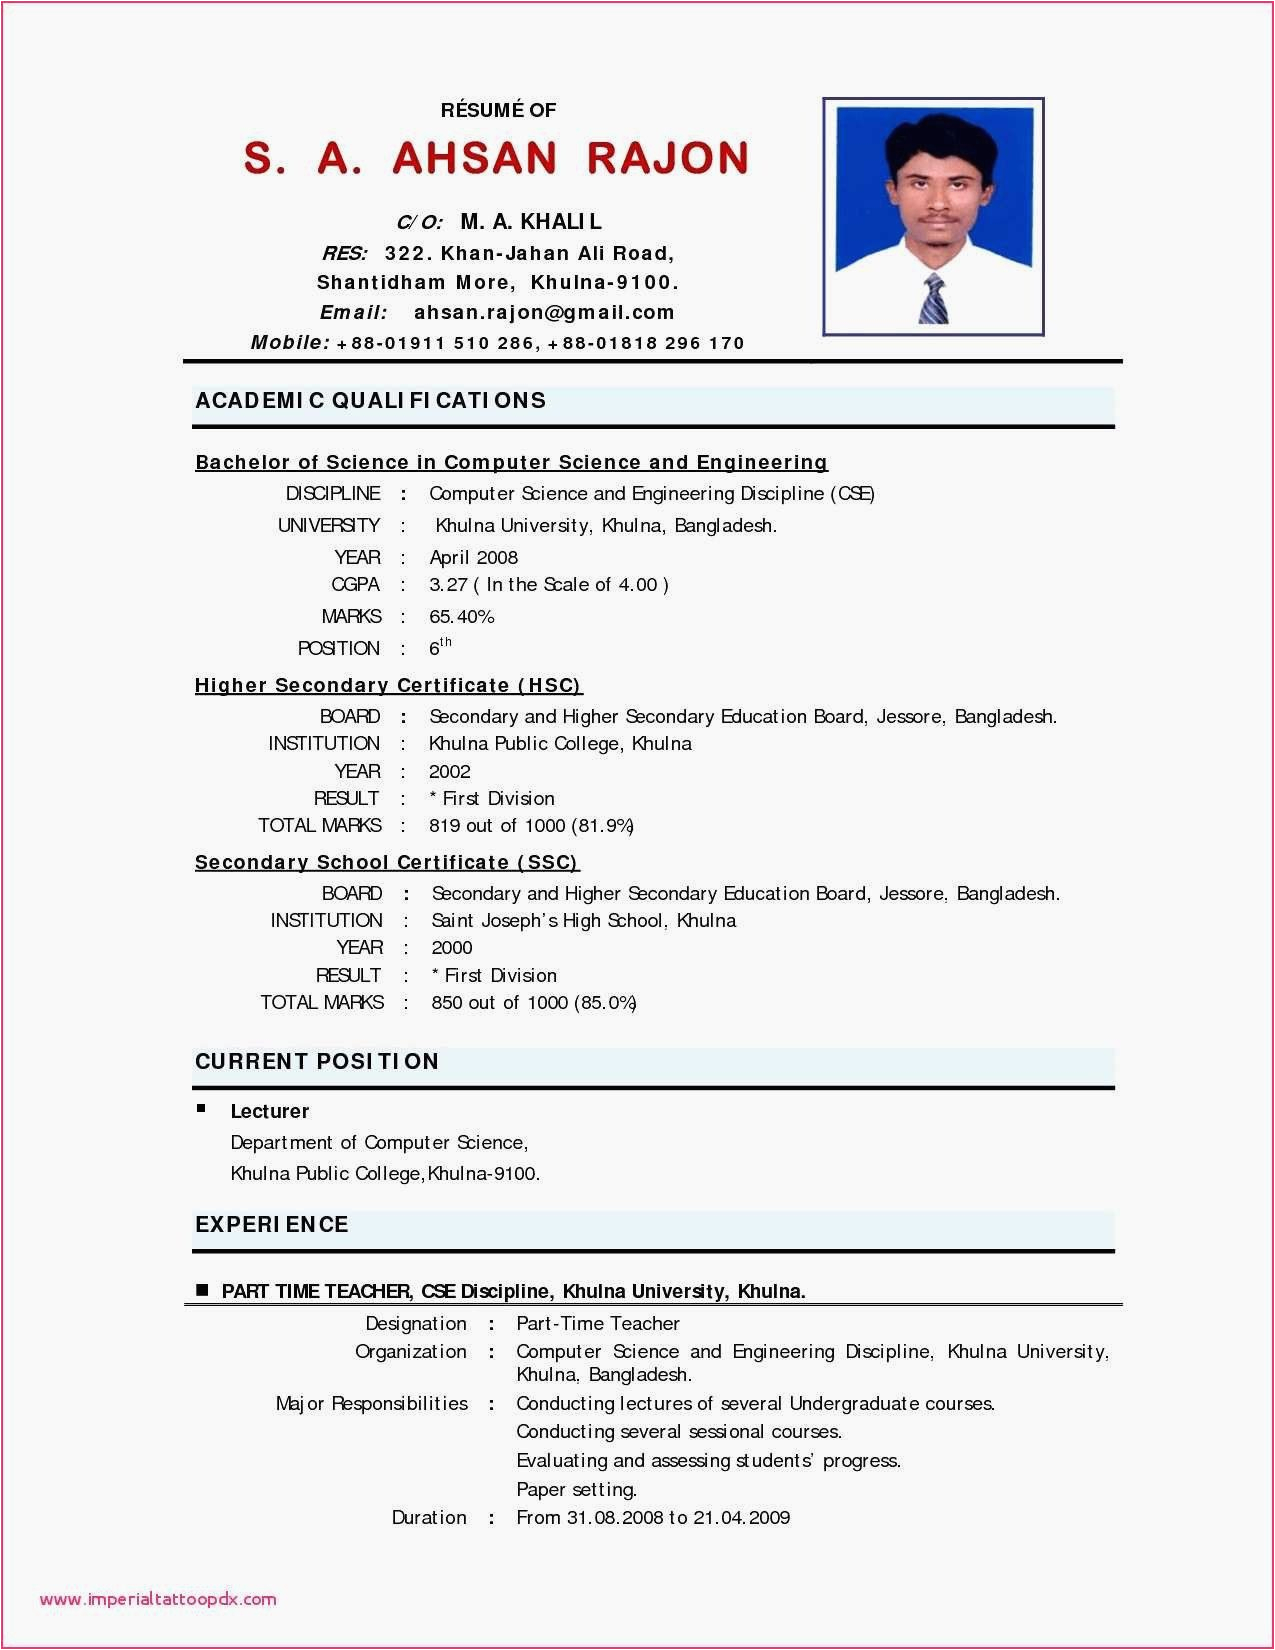 Sample Resume for Computer Science Student Fresher 30 Puter Science Student Resume No Experience In 2020